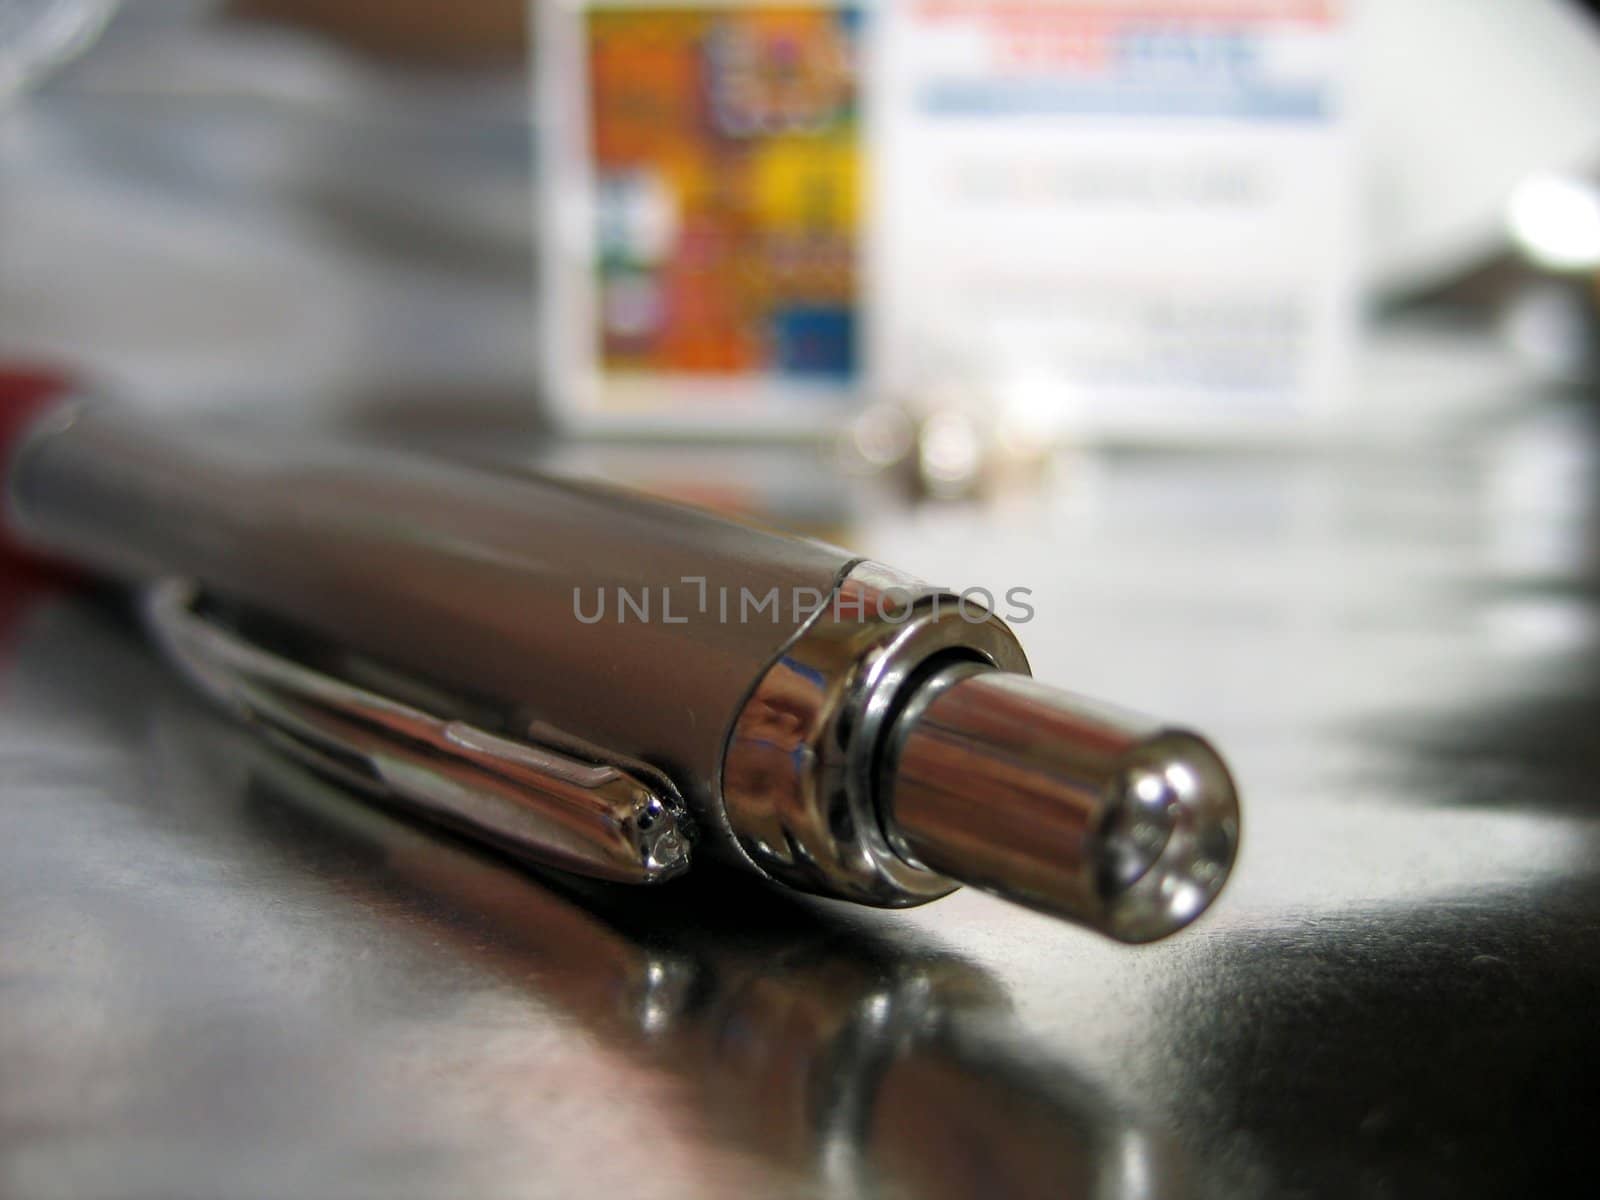 pen lying on a metalic surface with a visiting card in background